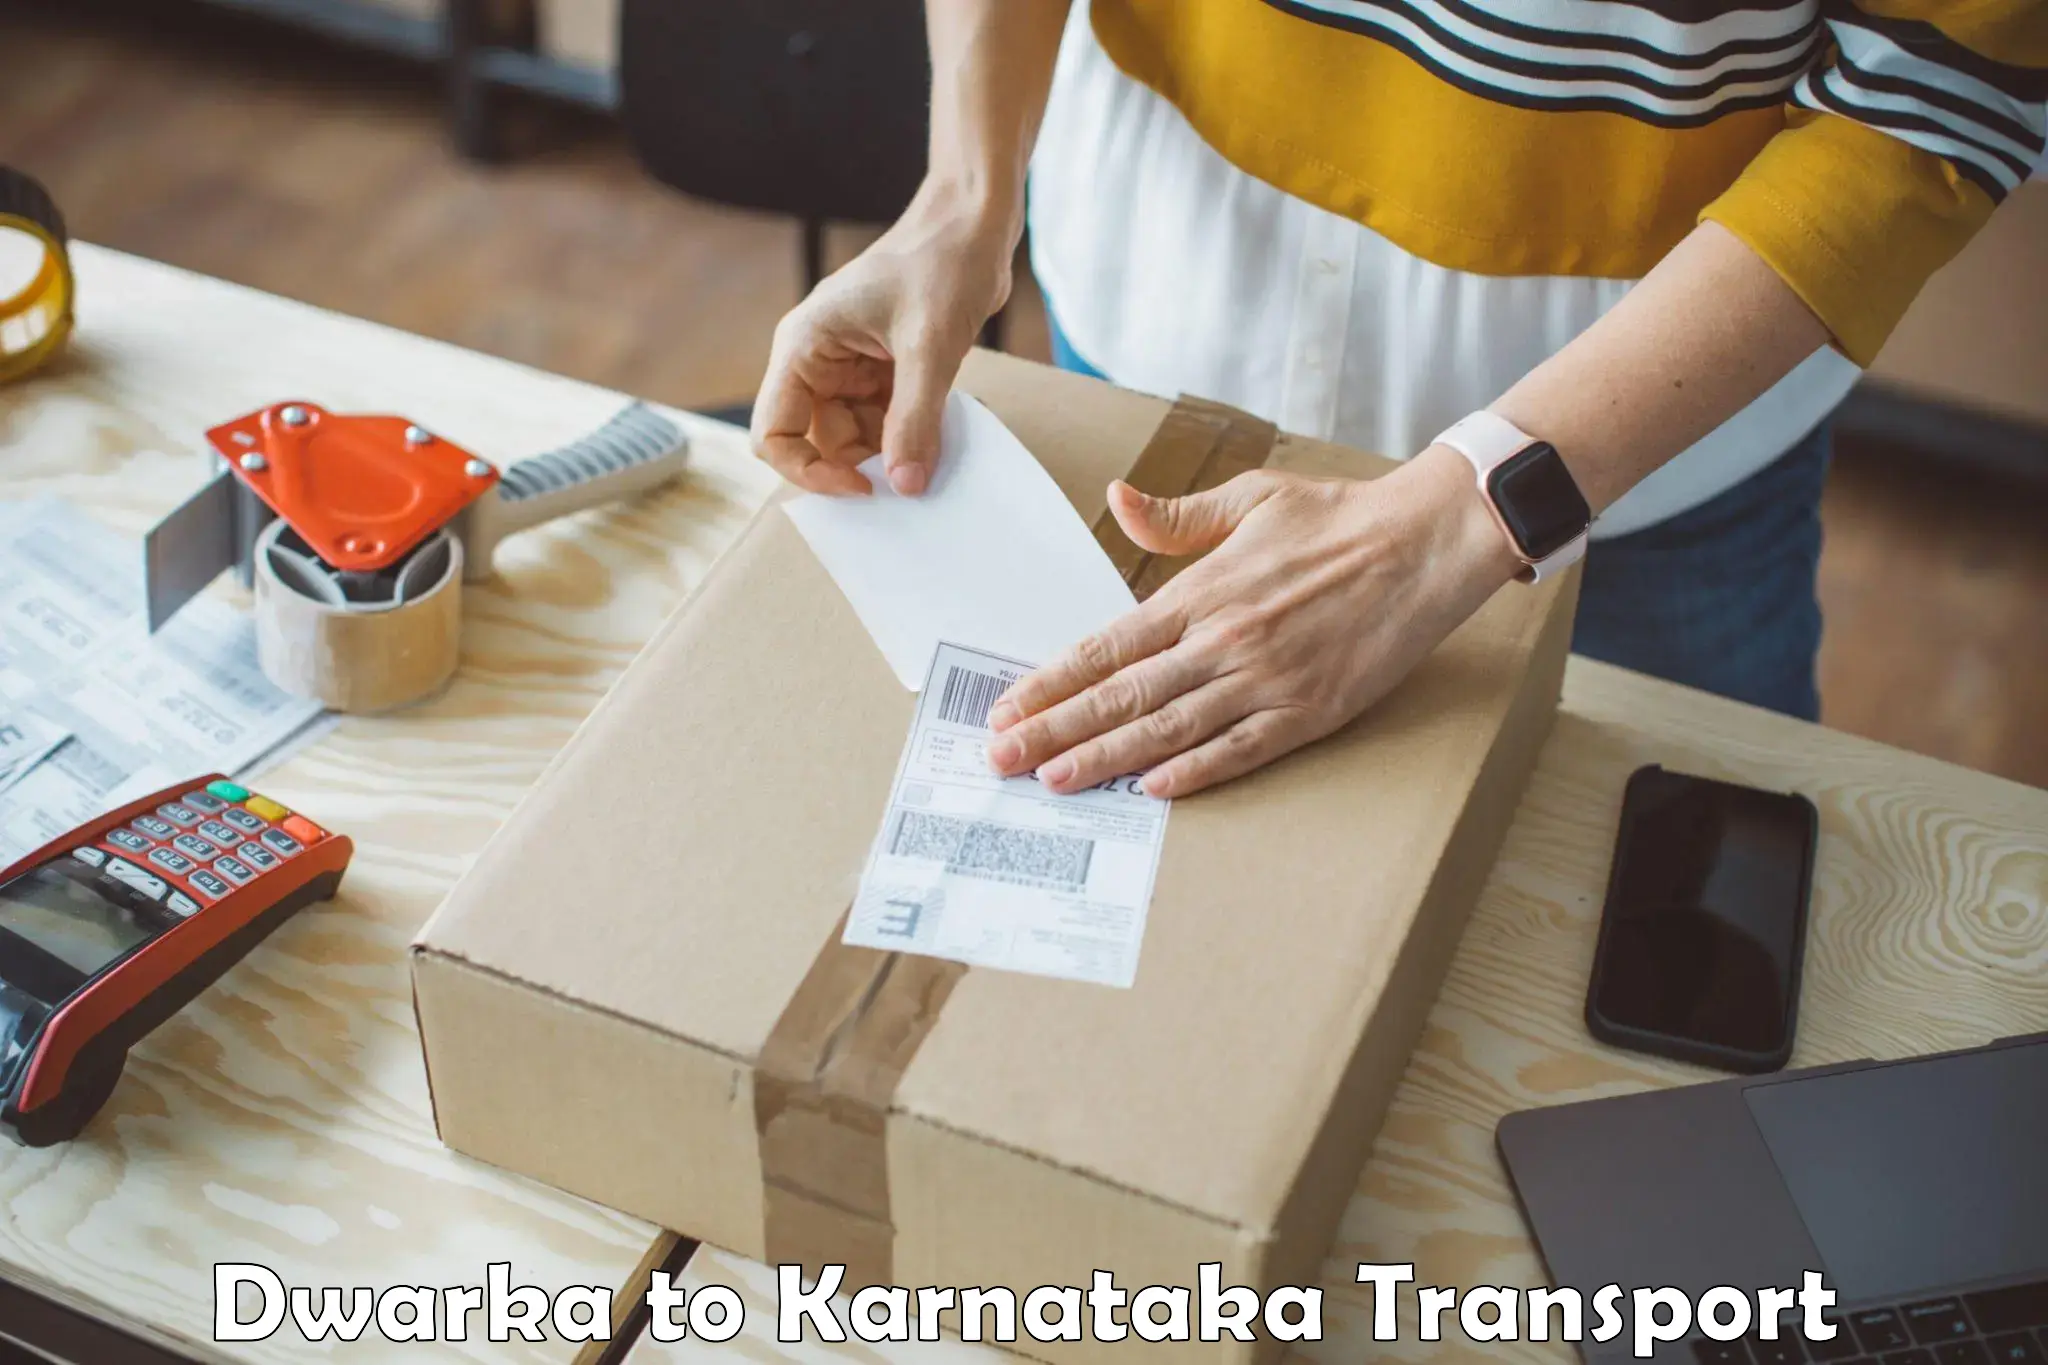 Cargo transportation services in Dwarka to Bangalore